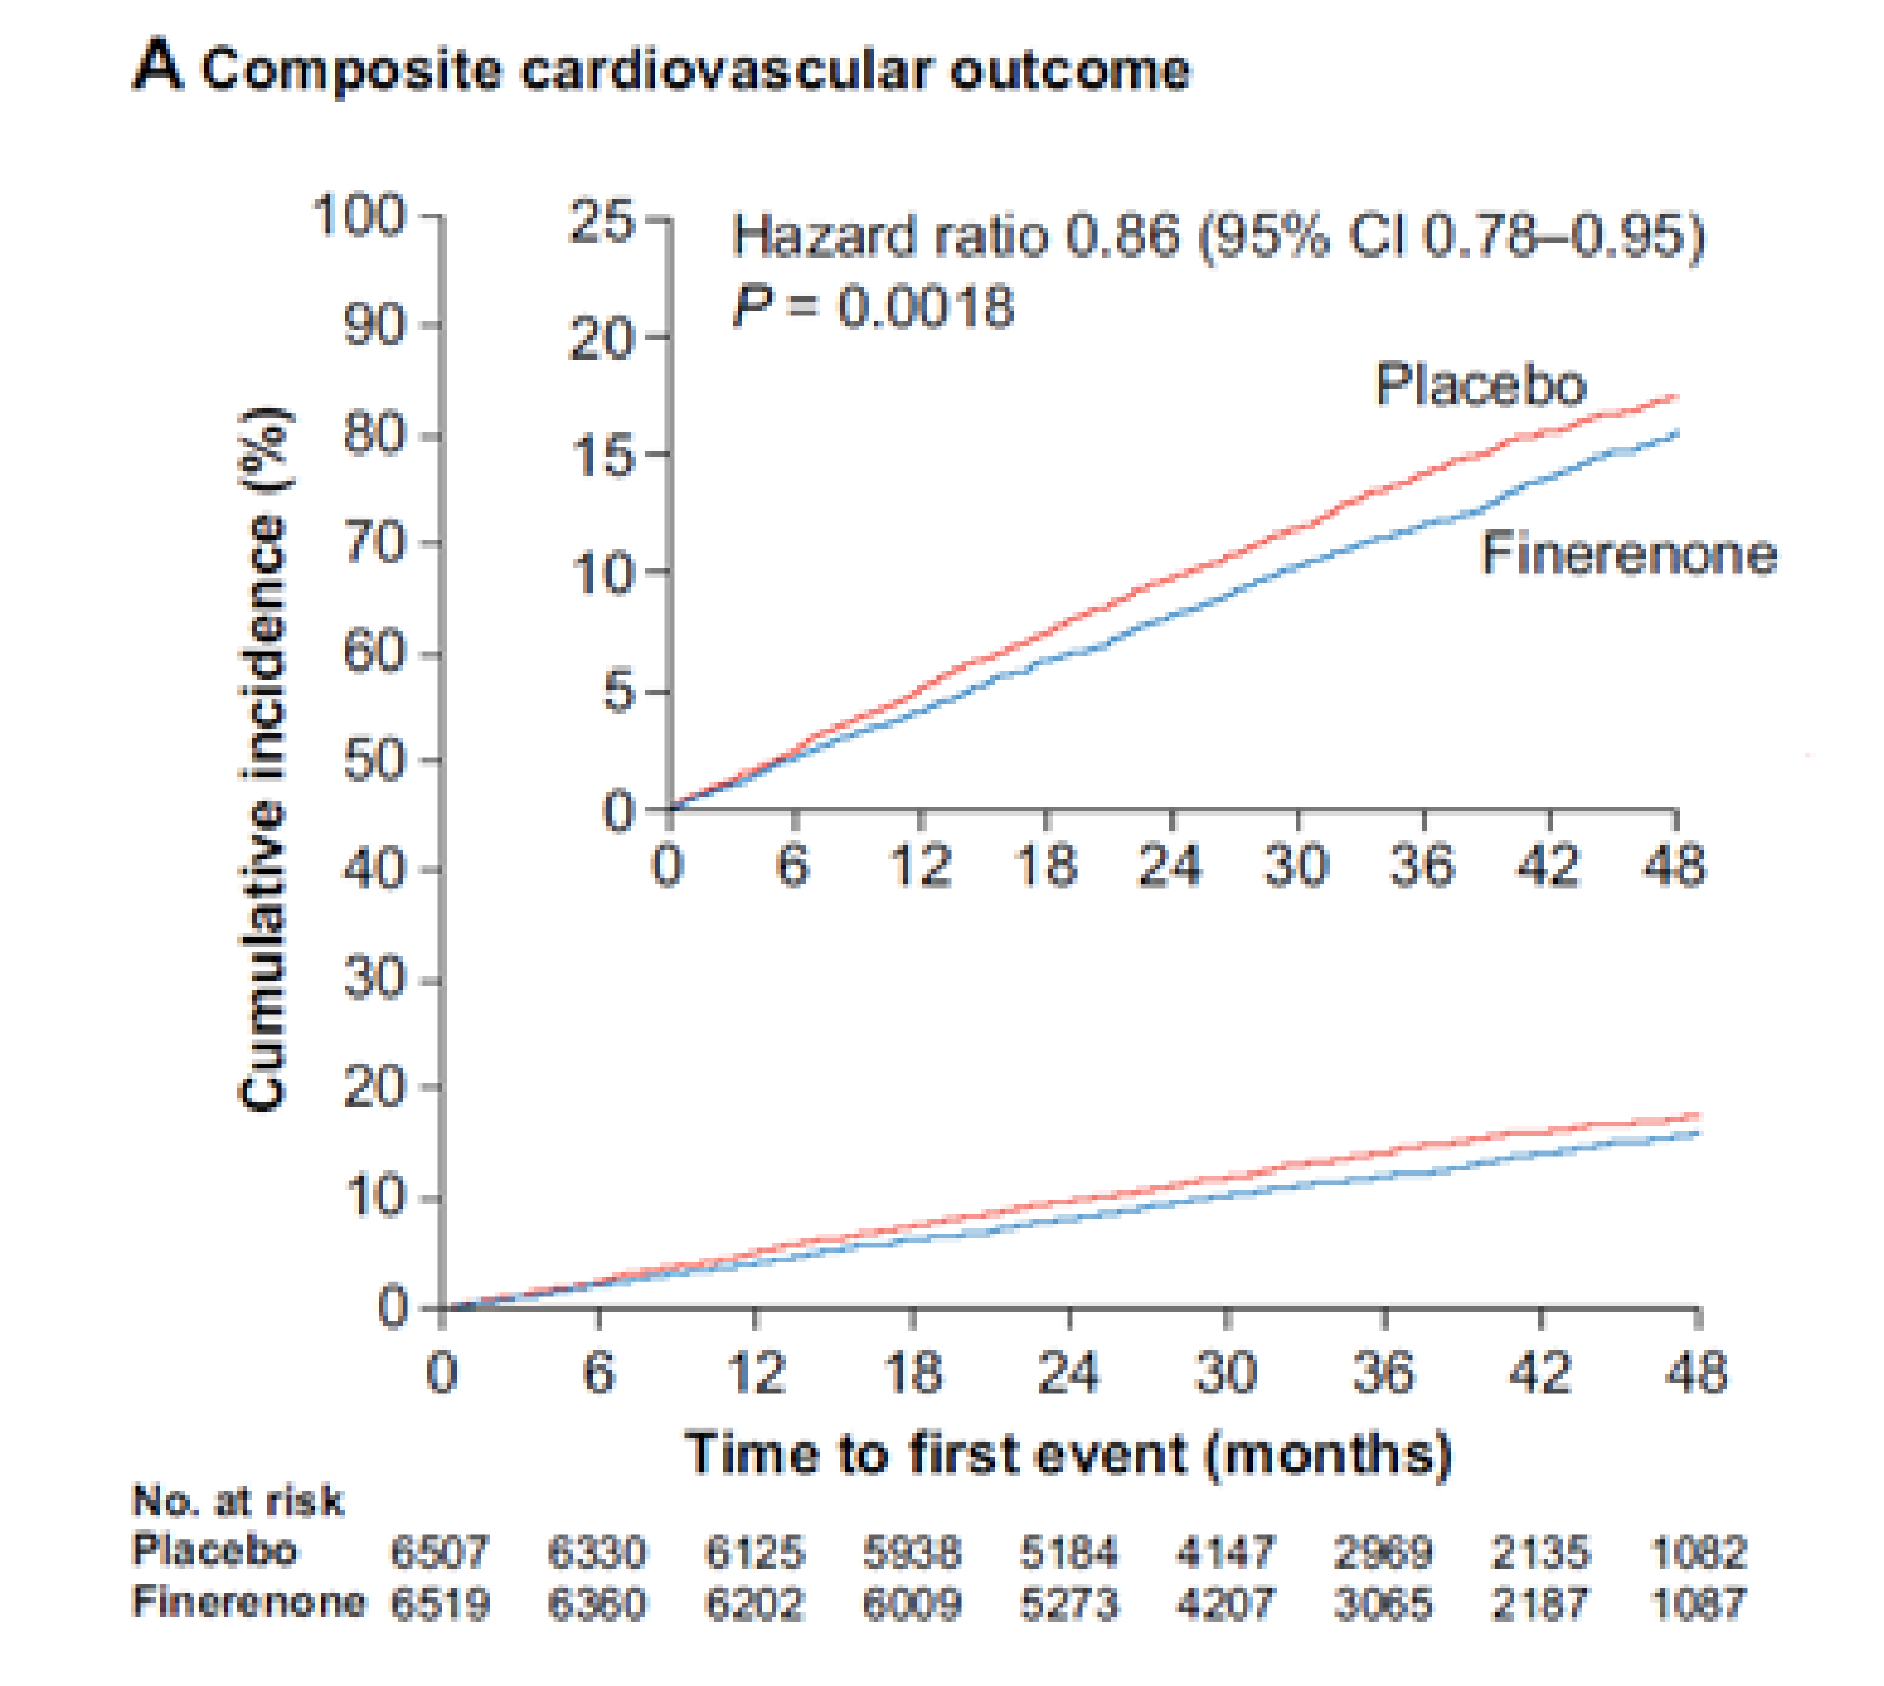 In this Aalen-Johansen curve of time to the composite cardiovascular outcome, the curves representing patients who received finerenone and placebo follow a similar upward slope, with the curves separating after month 6 and with the finerenone curve falling below the placebo curve until month 48.